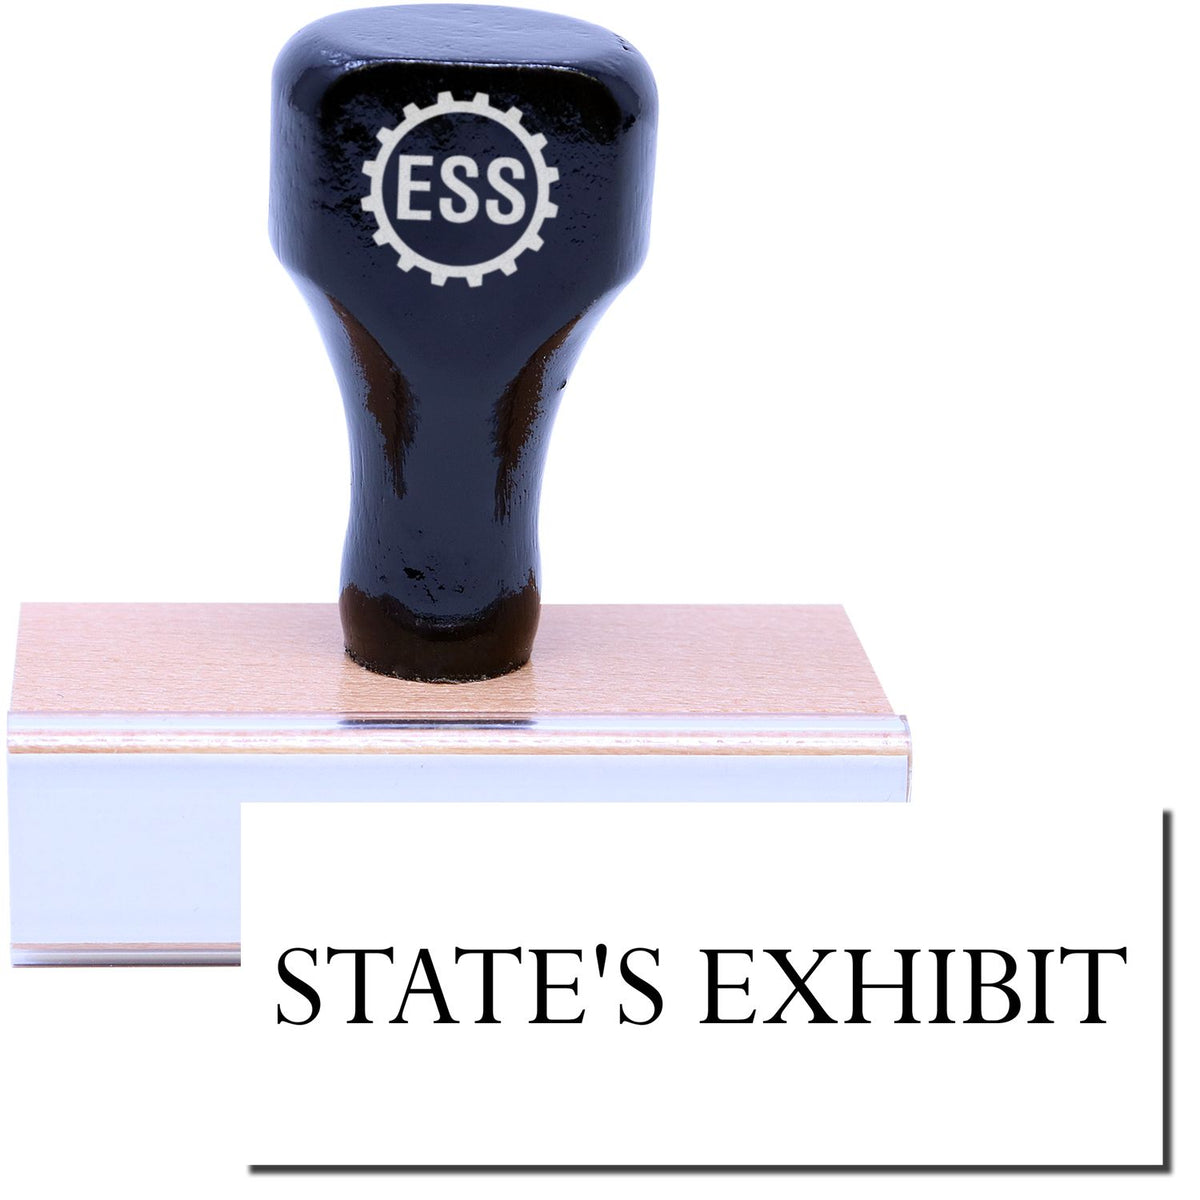 A stock office legal rubber stamp with a stamped image showing how the text &quot;STATE&#39;S EXHIBIT&quot; is displayed after stamping.